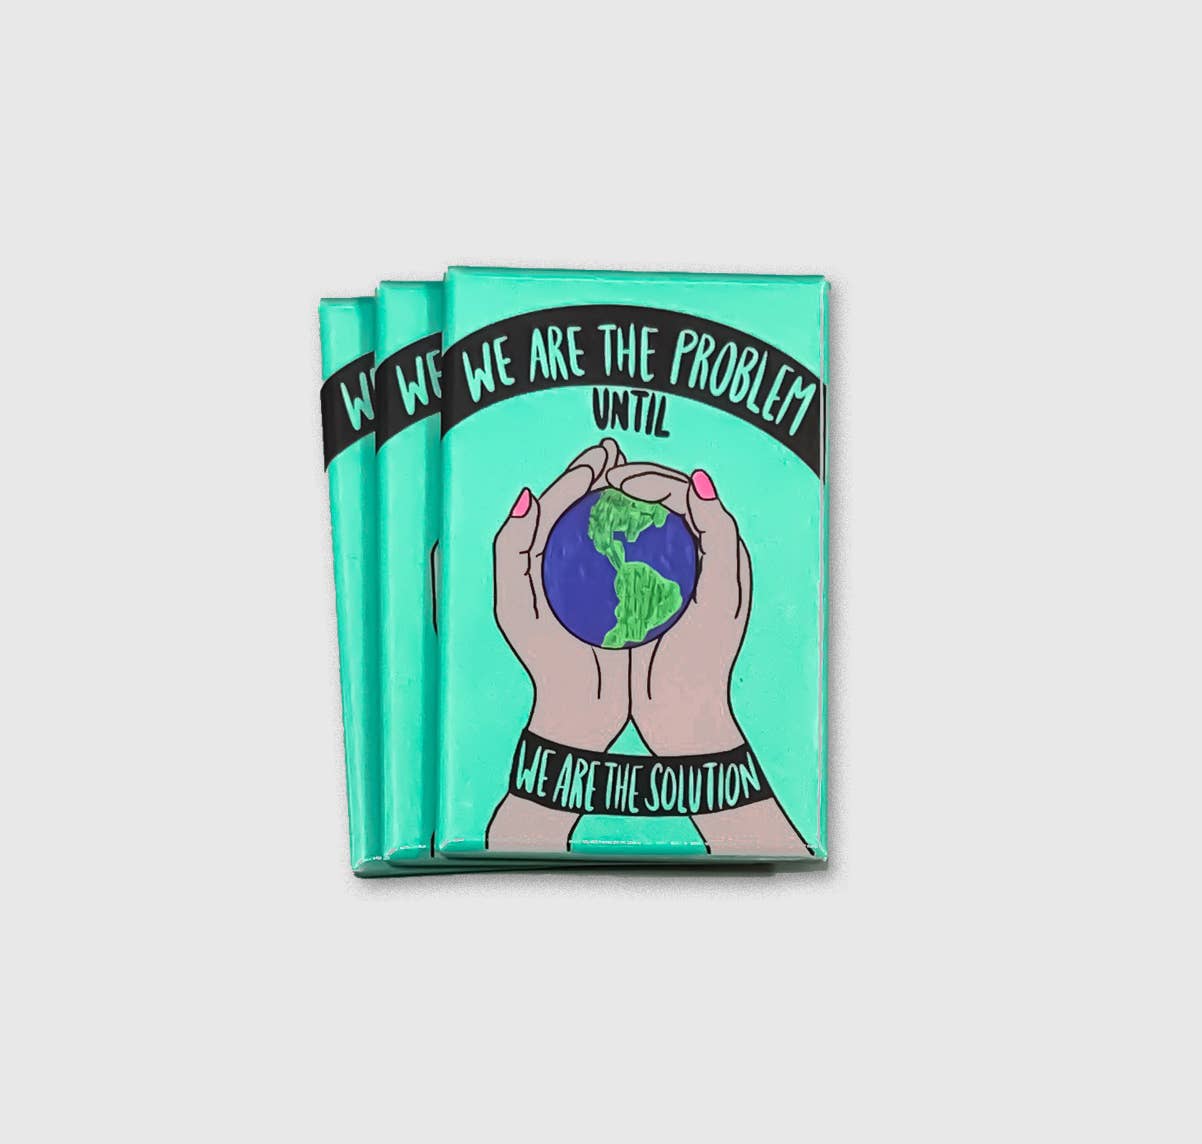 We are the problem until we are the solution quote magnet with earth in hands and green background by Citizen Ruth